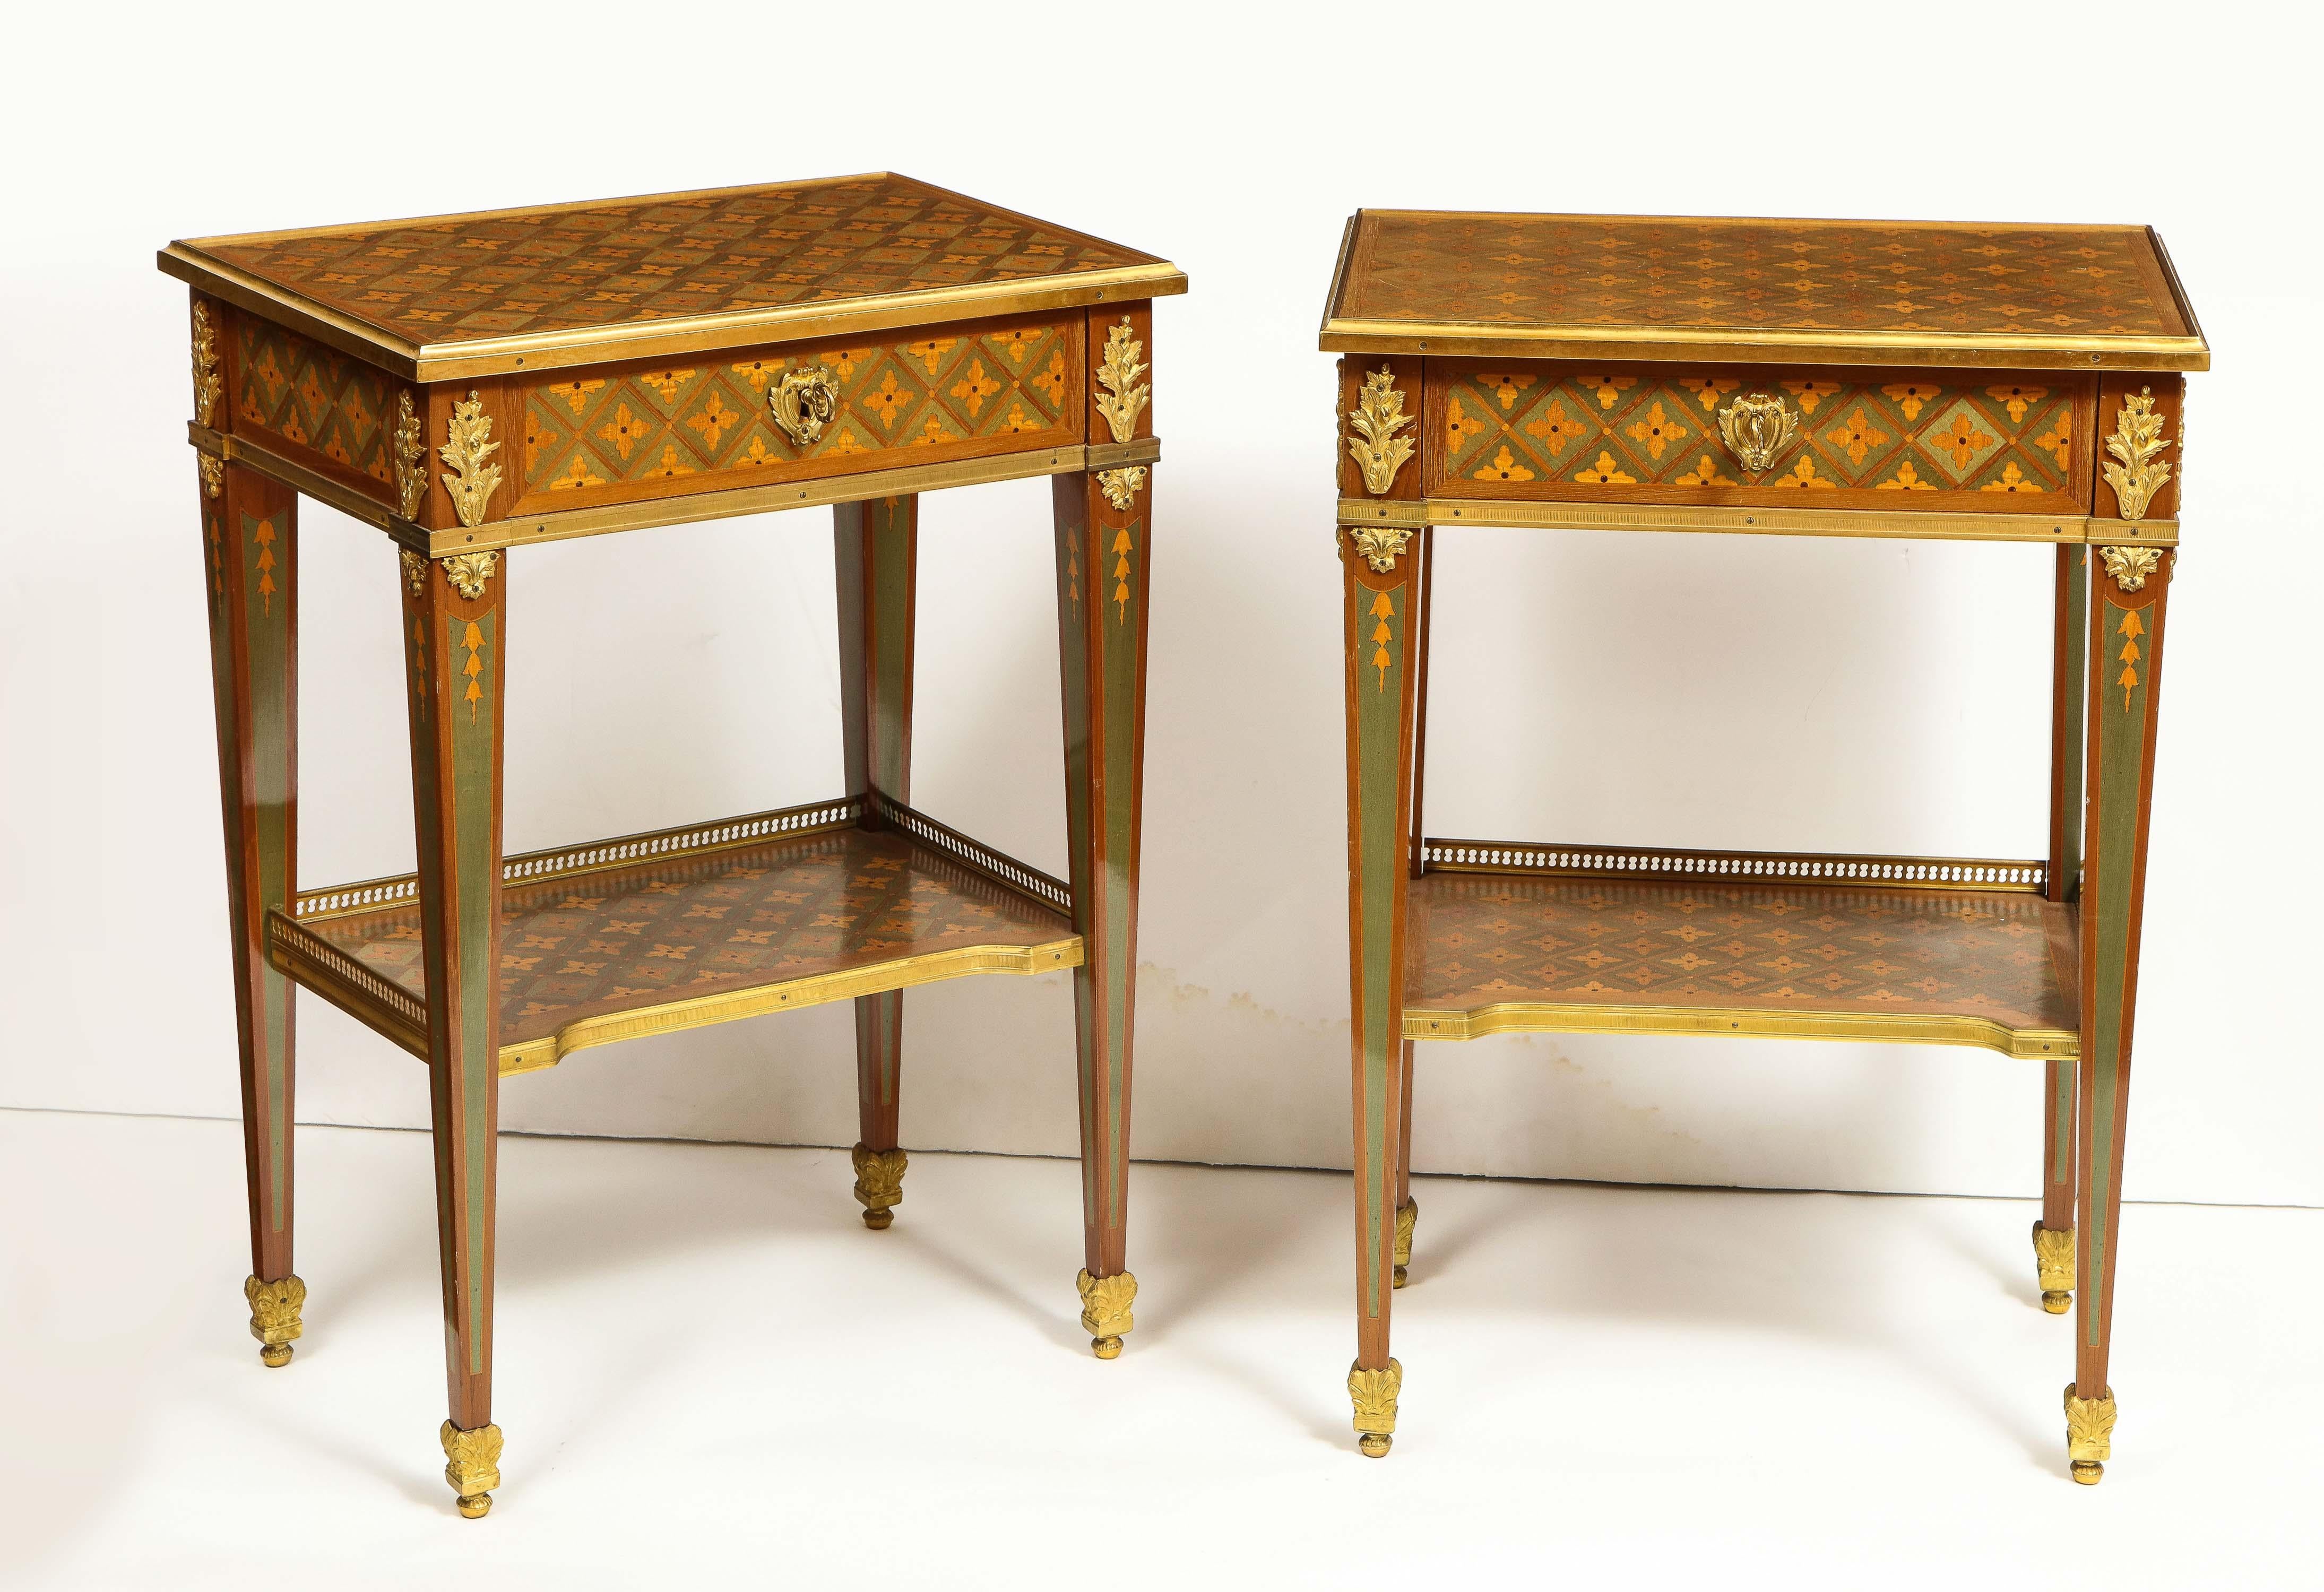 Louis XVI Exceptional Pair of French Ormolu-Mounted Parquetry and Marquetry Side Tables For Sale